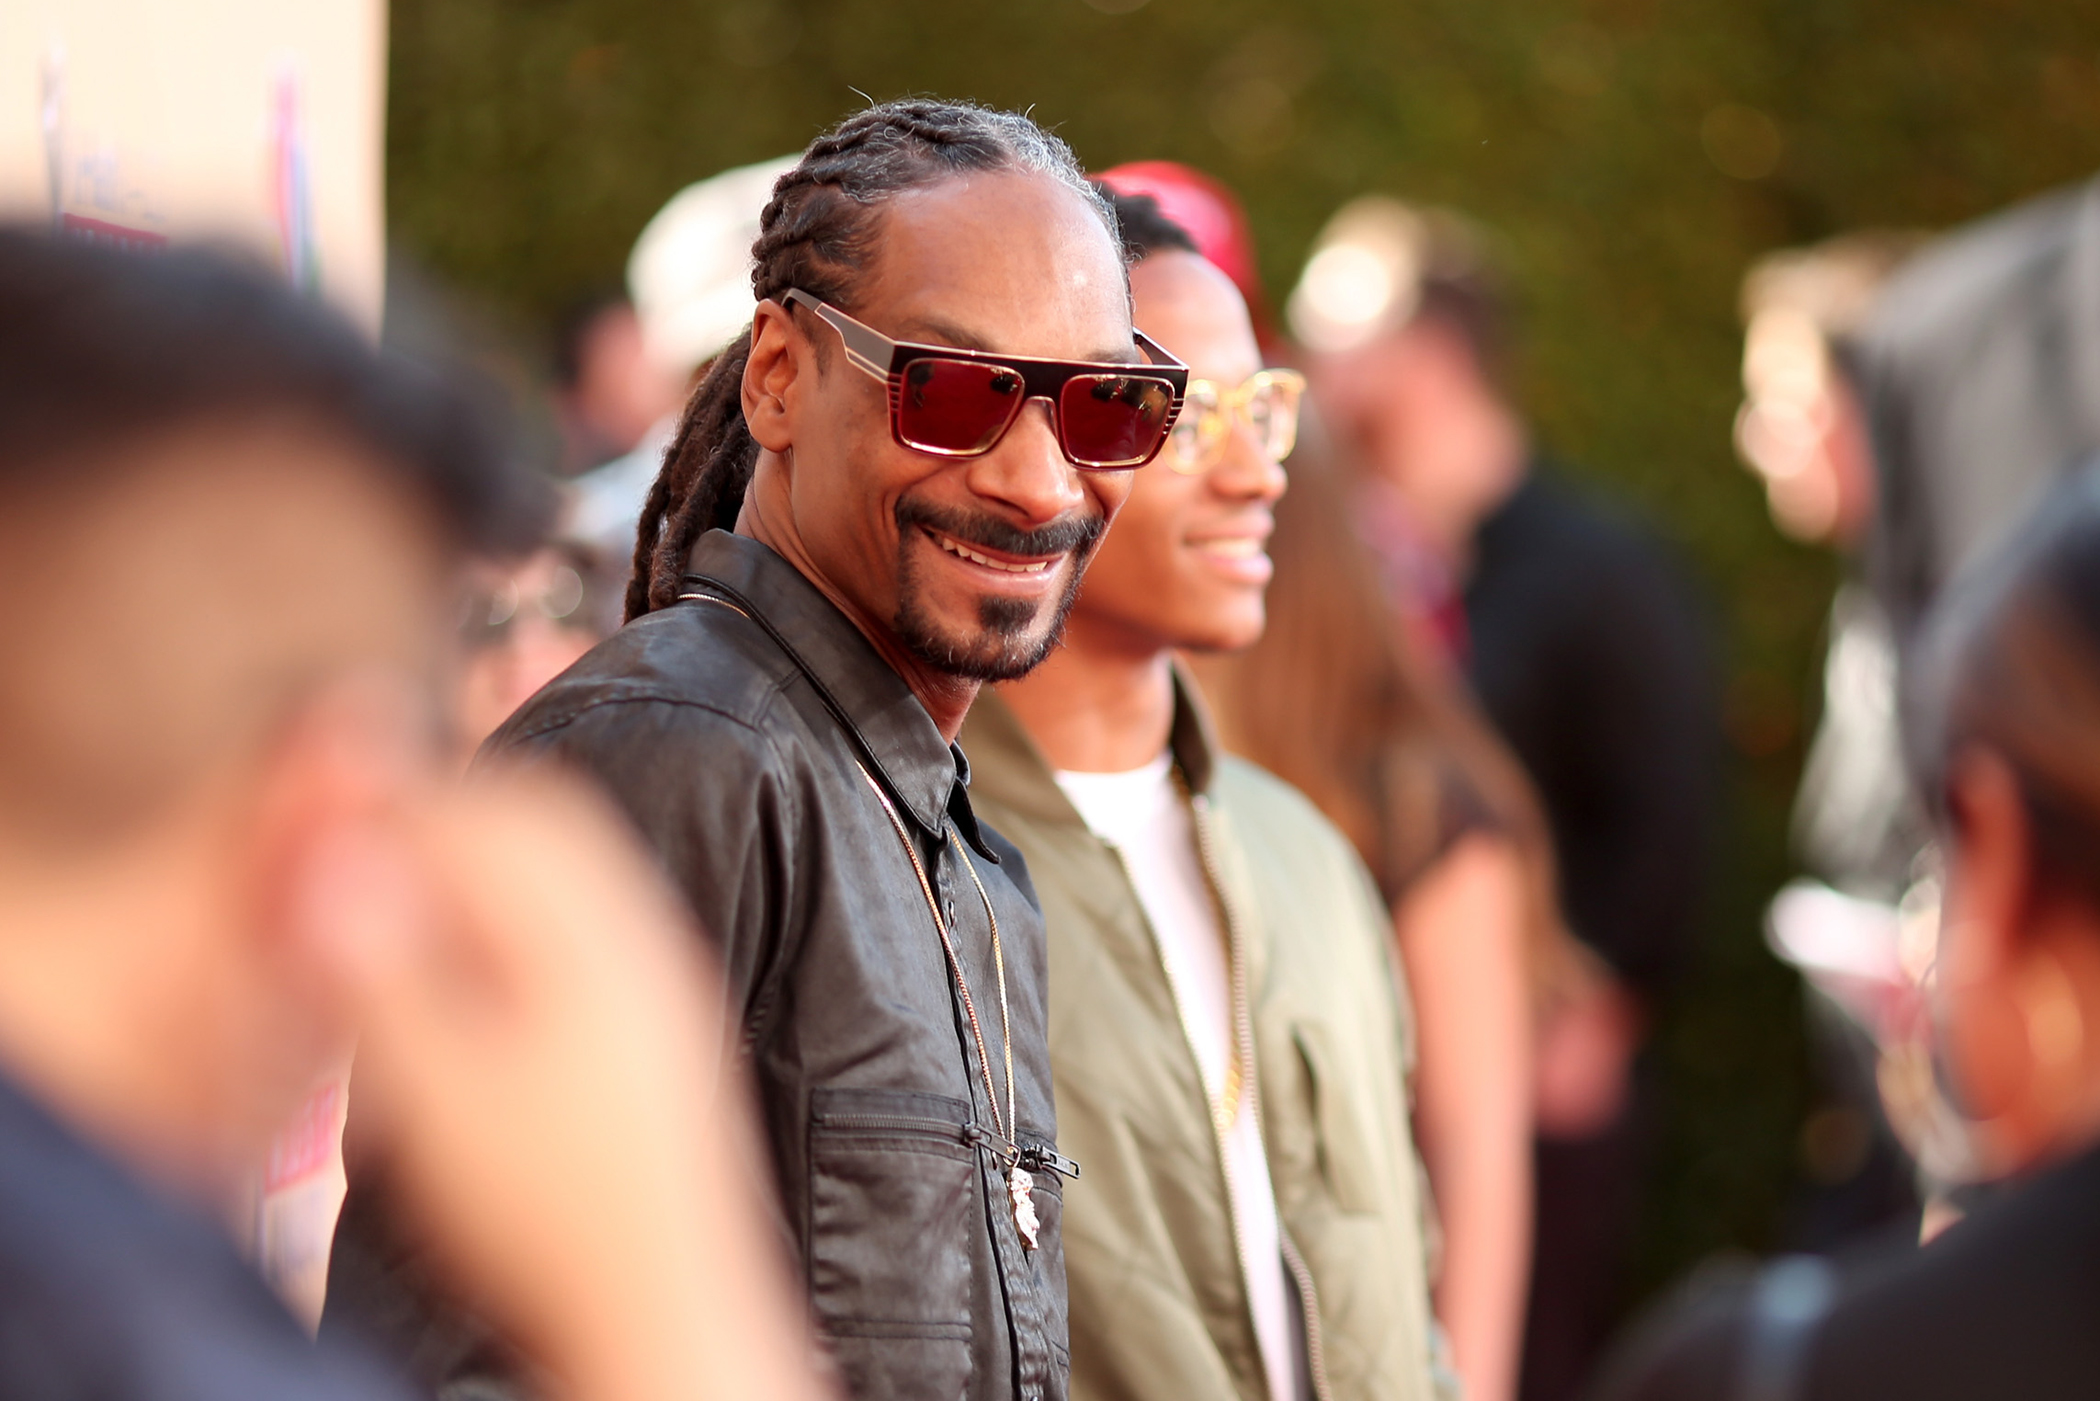 Recording artist Snoop Dogg arrives at the iHeartRadio Music Awards held at the Shrine Auditorium on March 29, 2015 in Los Angeles, California.